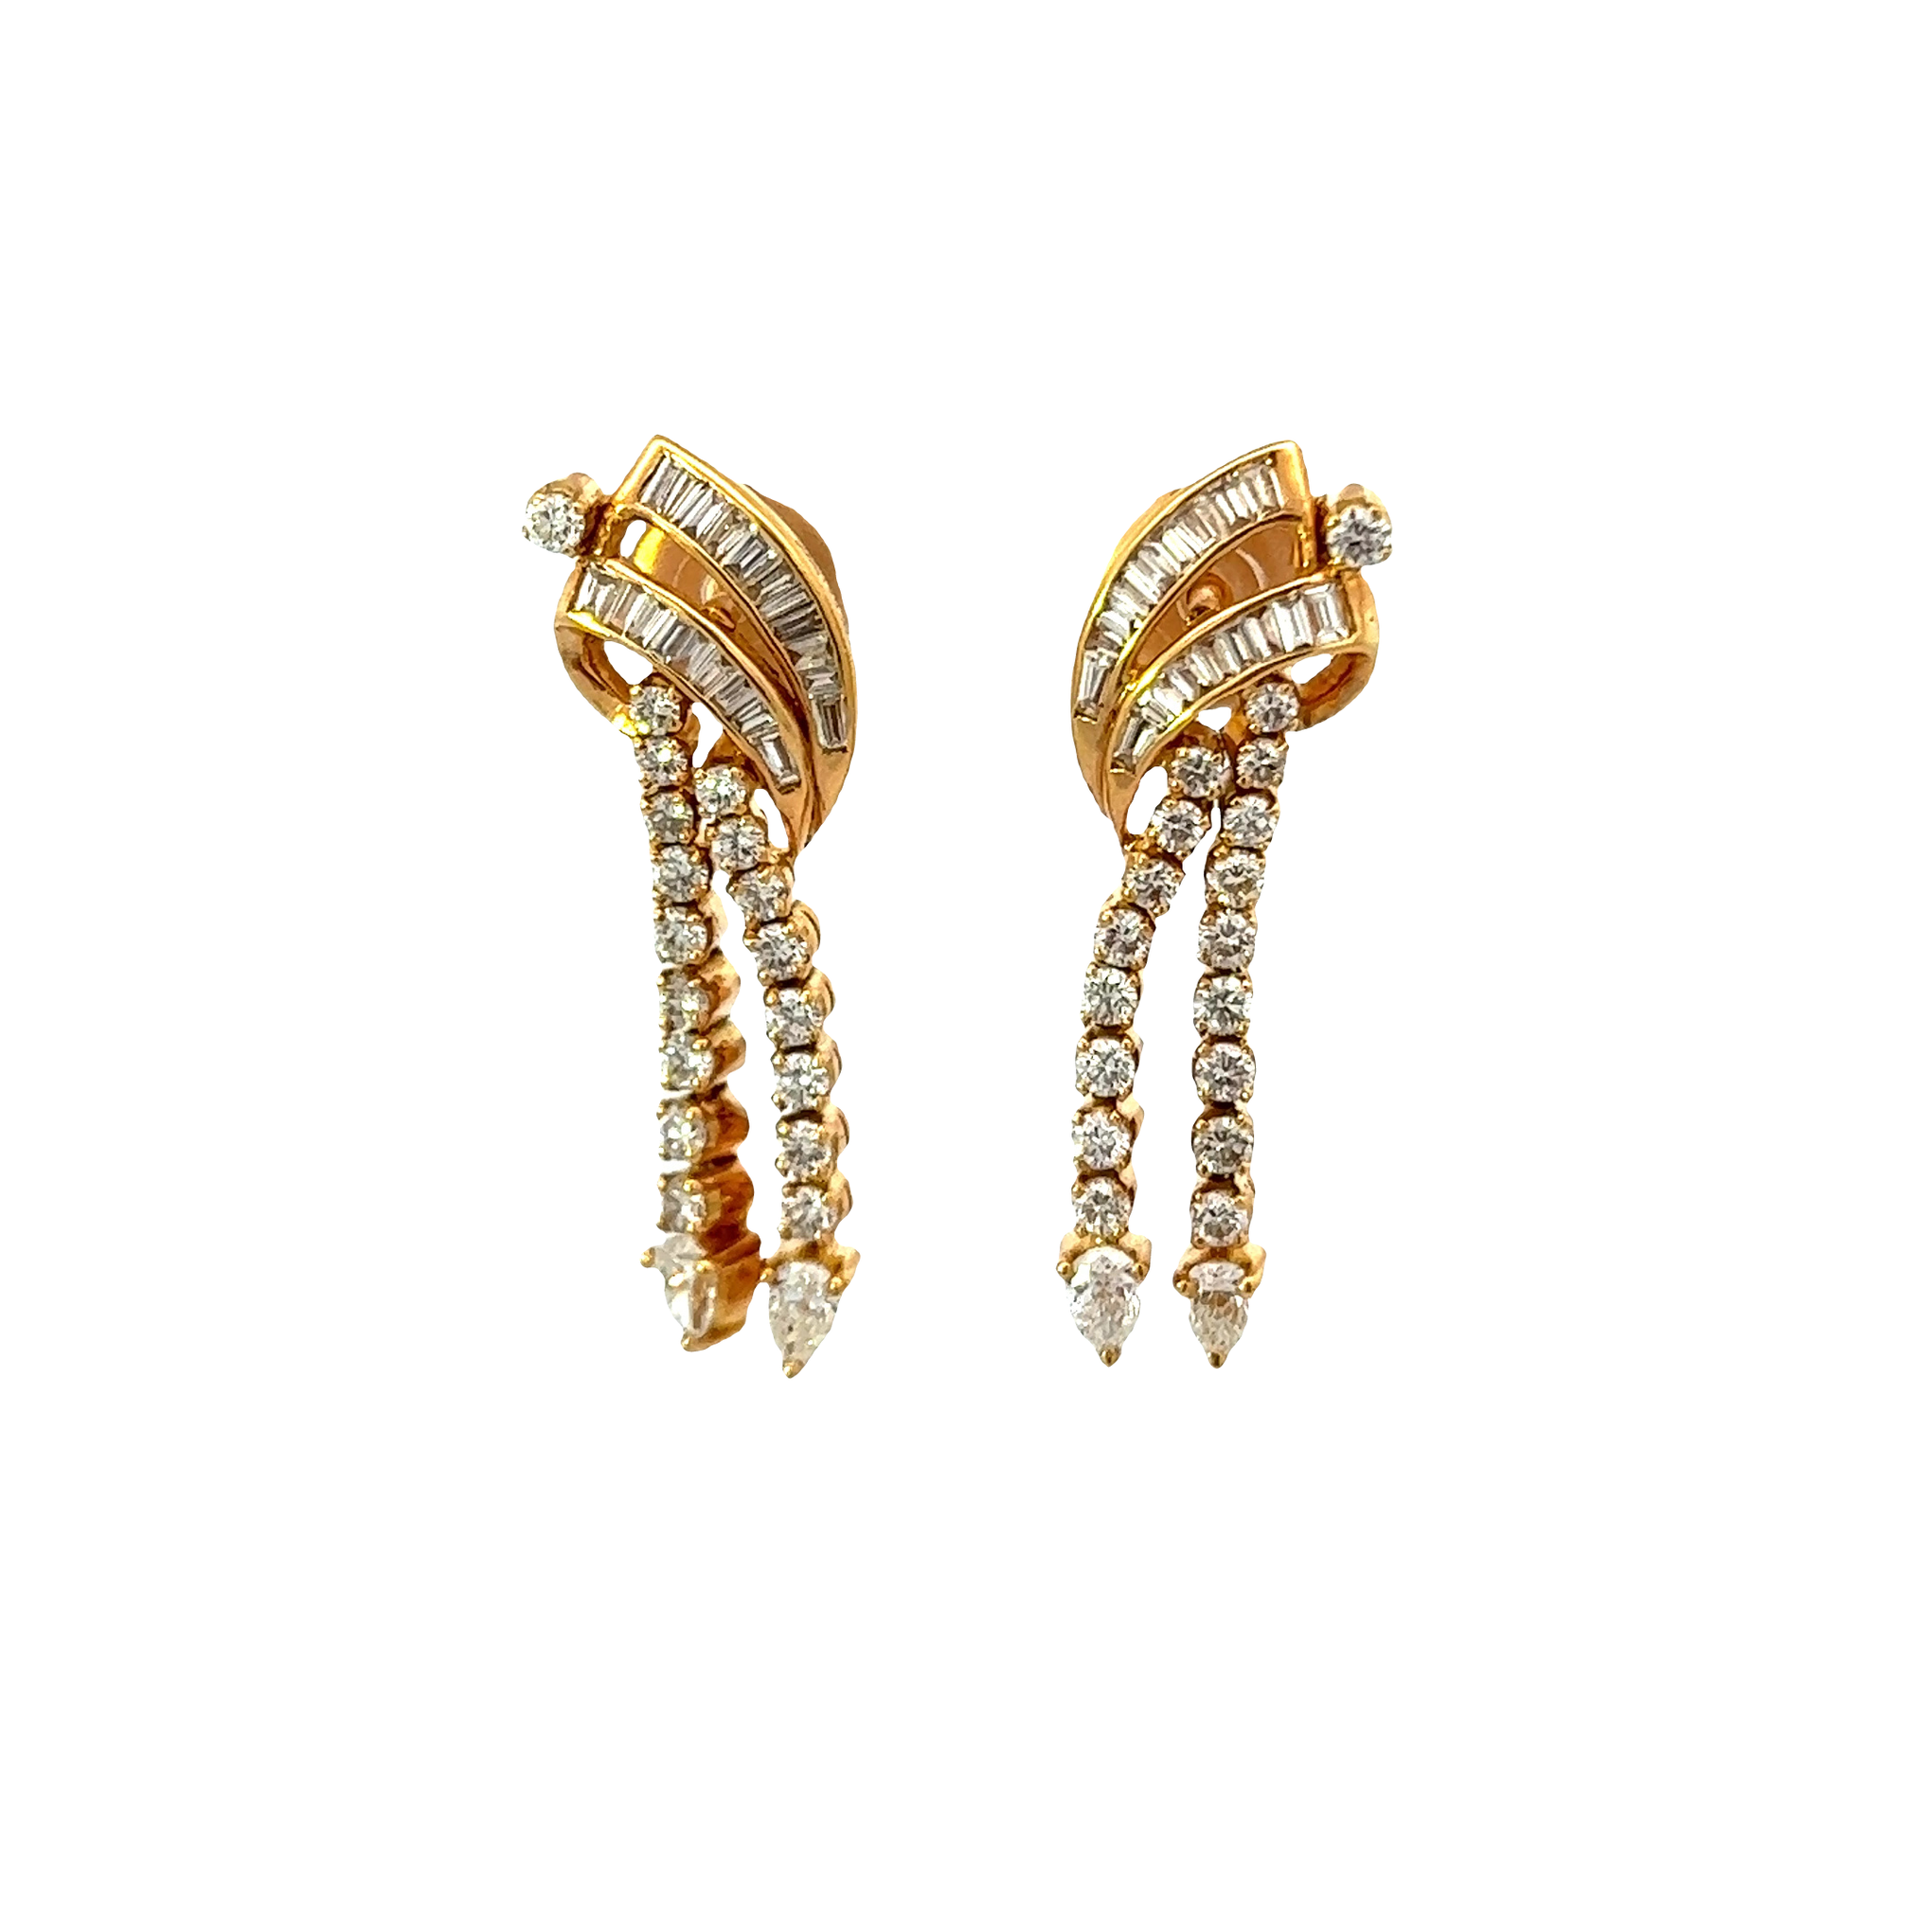 18KT Yellow Gold Baguette And Pear Shaped Diamond Earrings